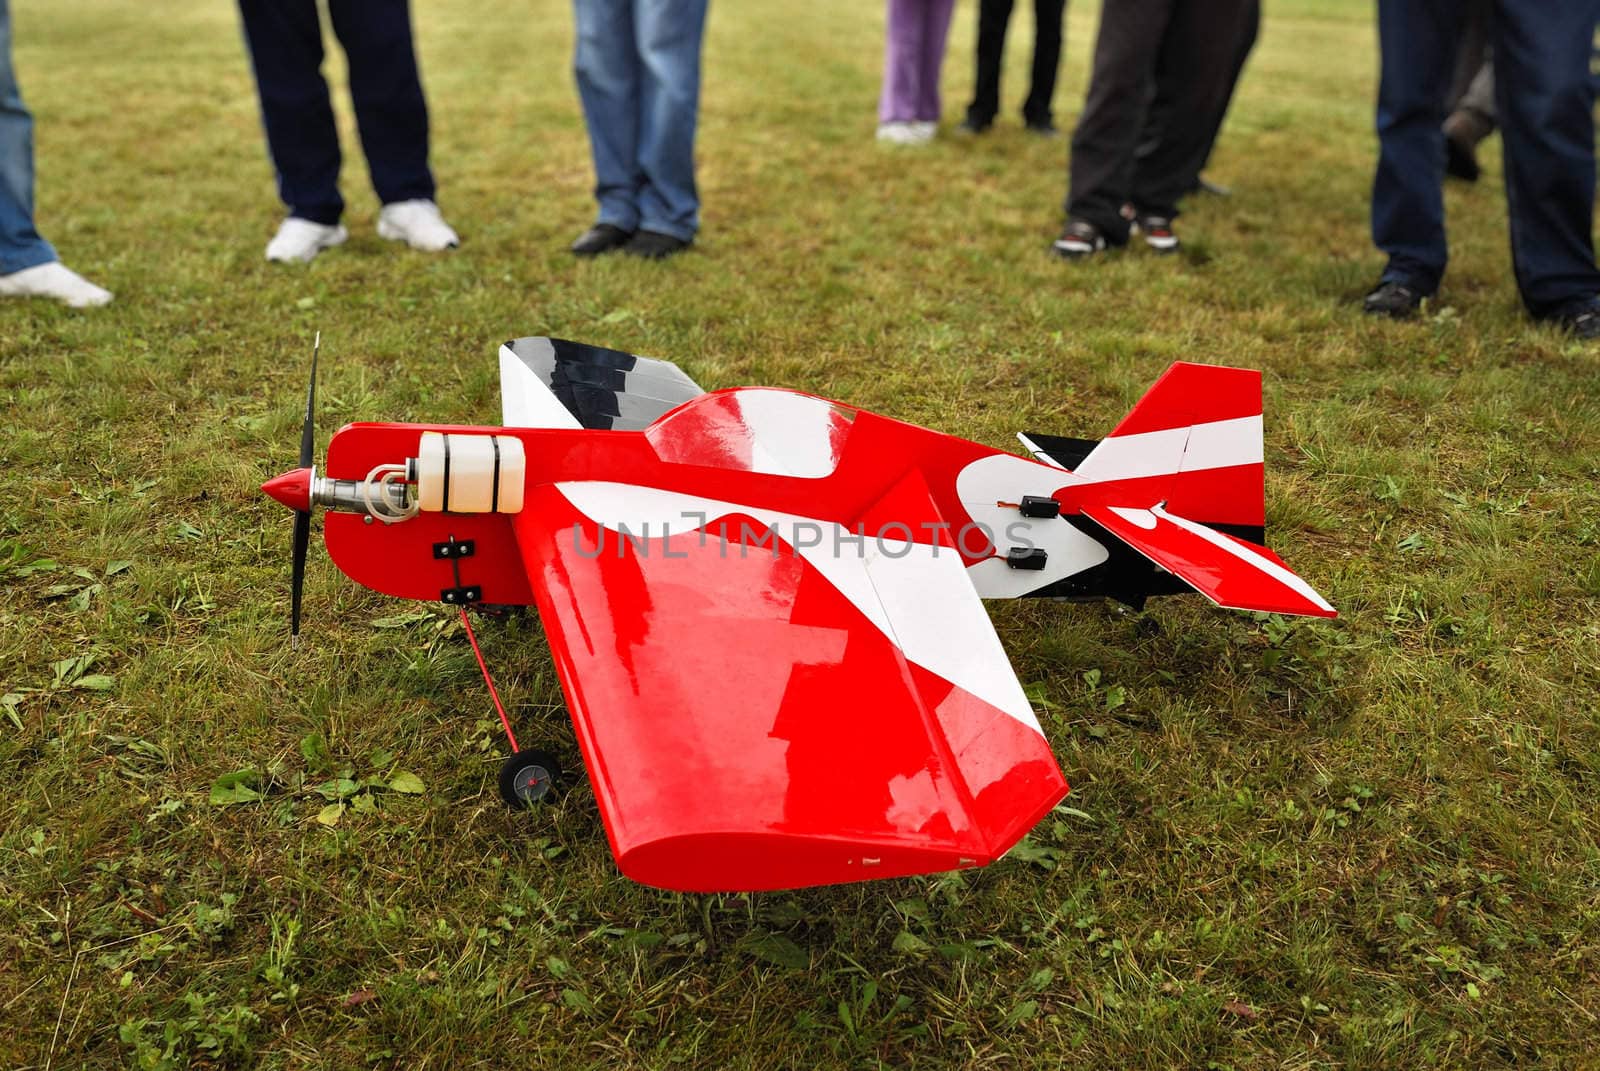 Red and white radio controlled aircraft with methanol engine on a grassy field.